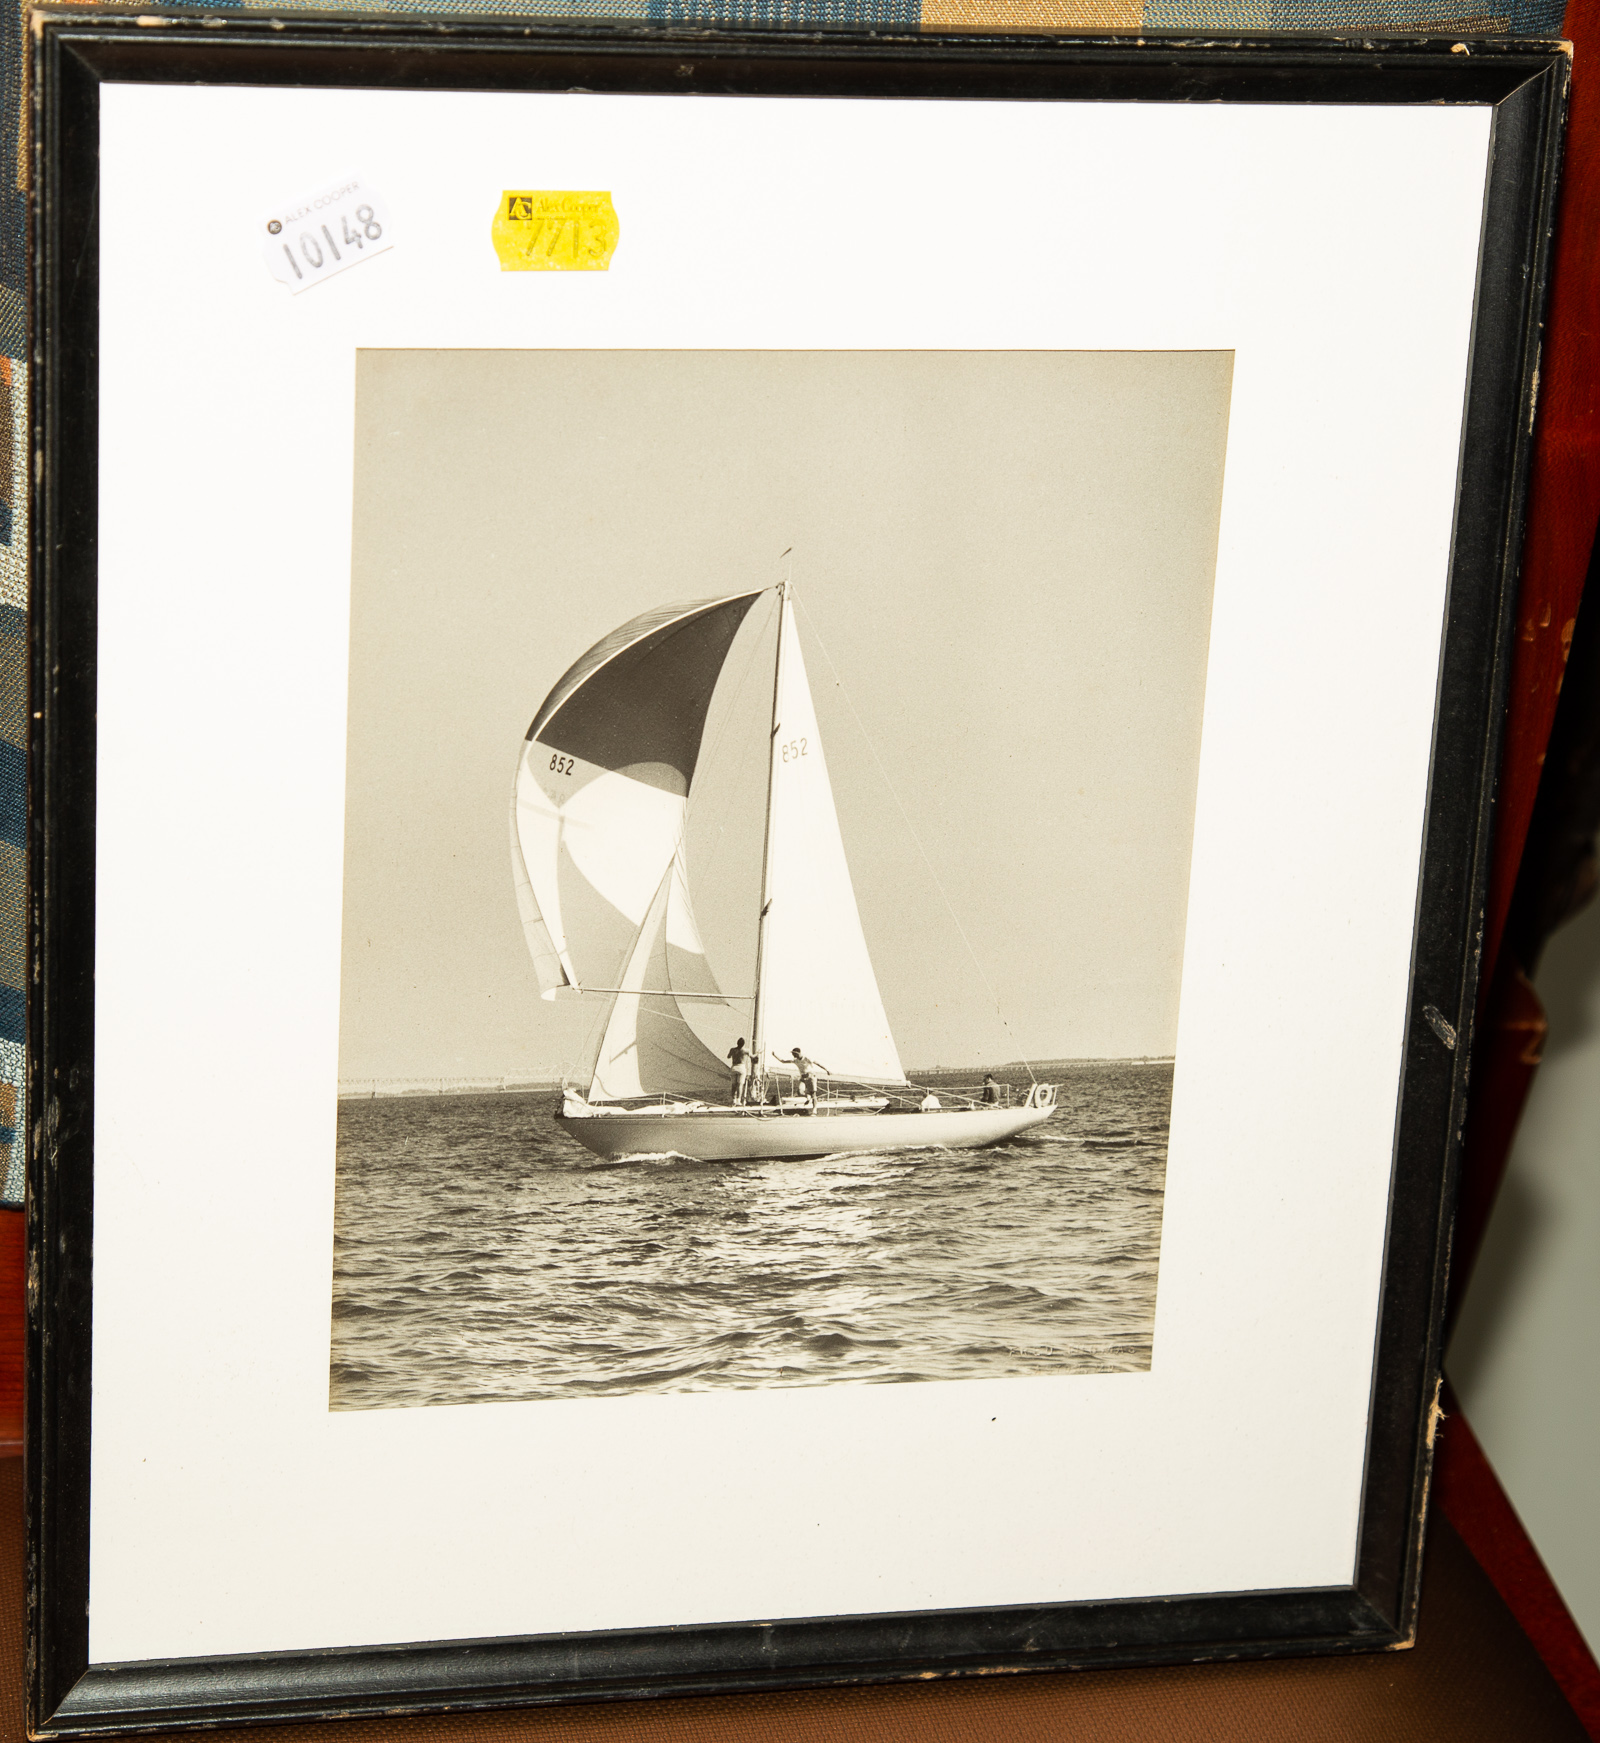 FRAMED PHOTOGRAPH OF A SAILBOAT